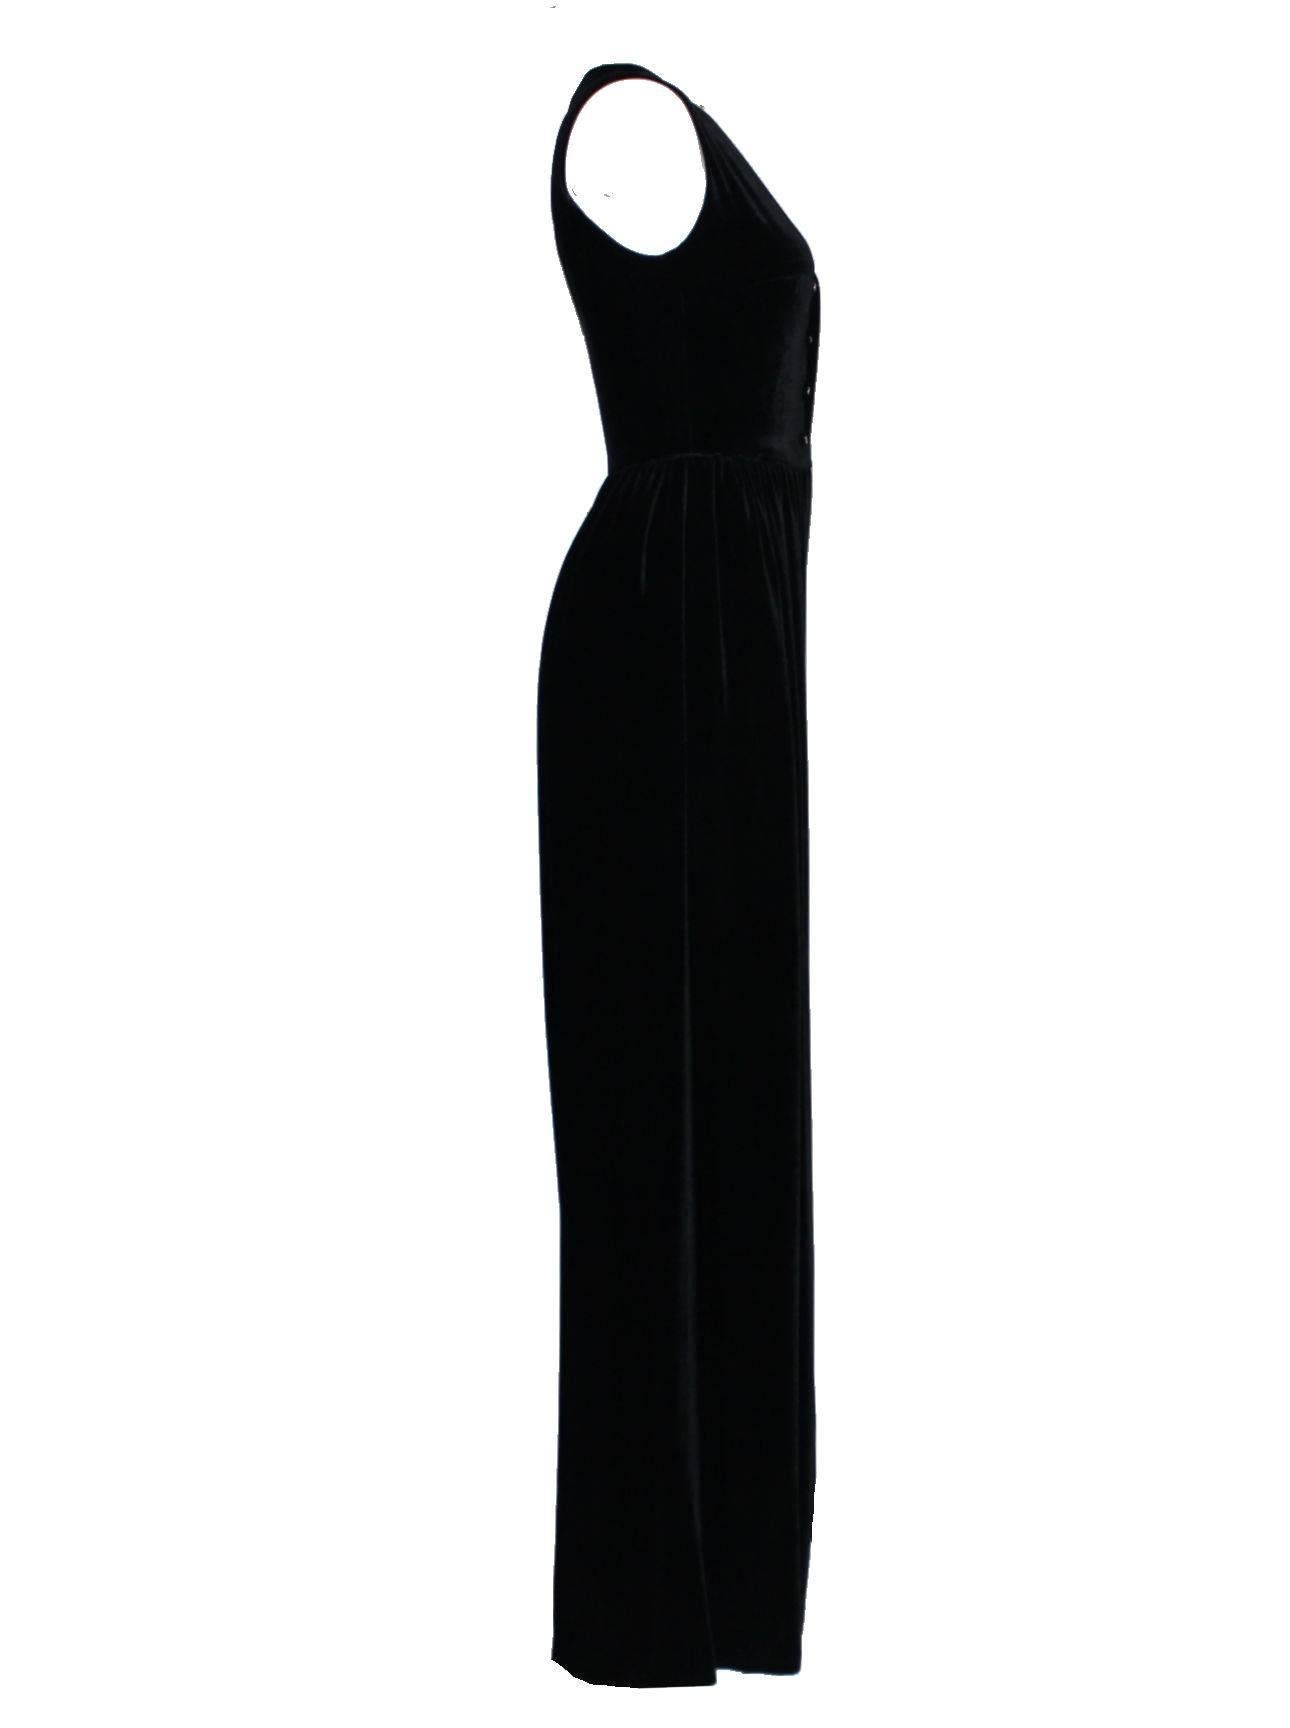 Chanel Black Velvet Jumpsuit Overall CC Buttons as seen on Celine Dion ...